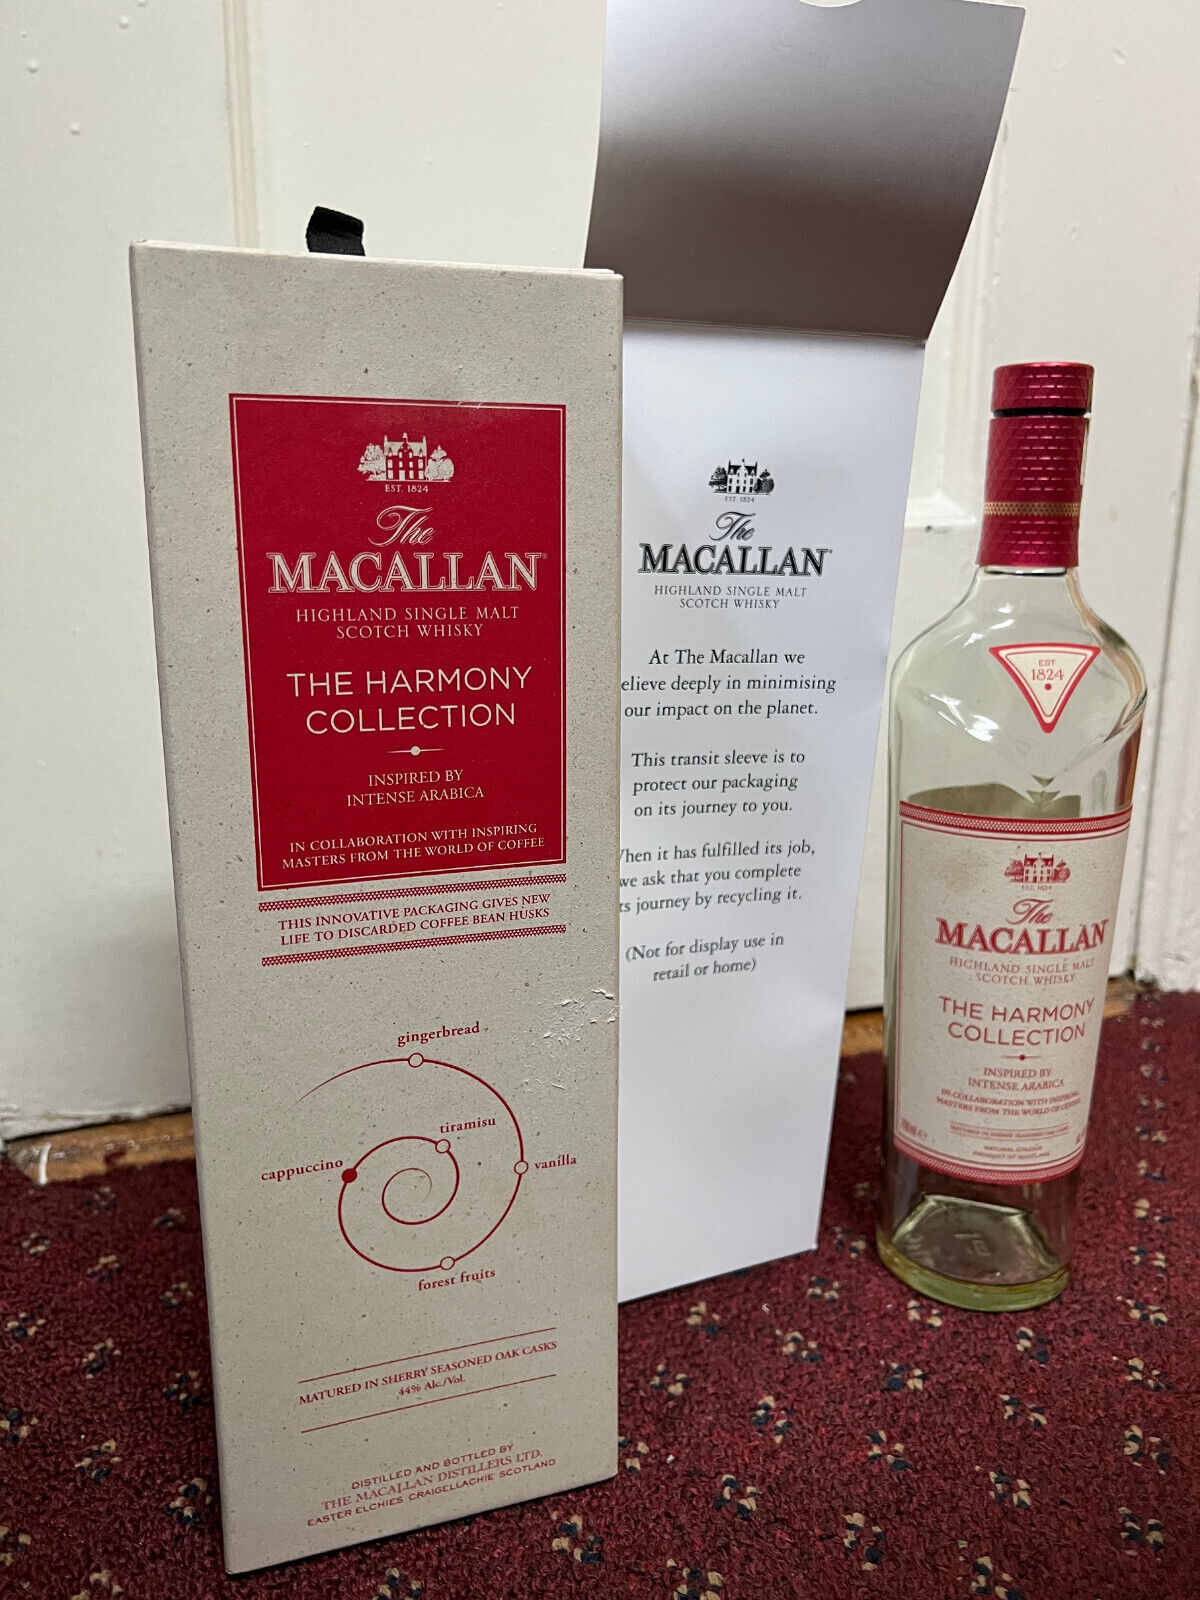 Macallan The Harmony Collection INTENSE ARABICA. bottle AND box with SLEEVE